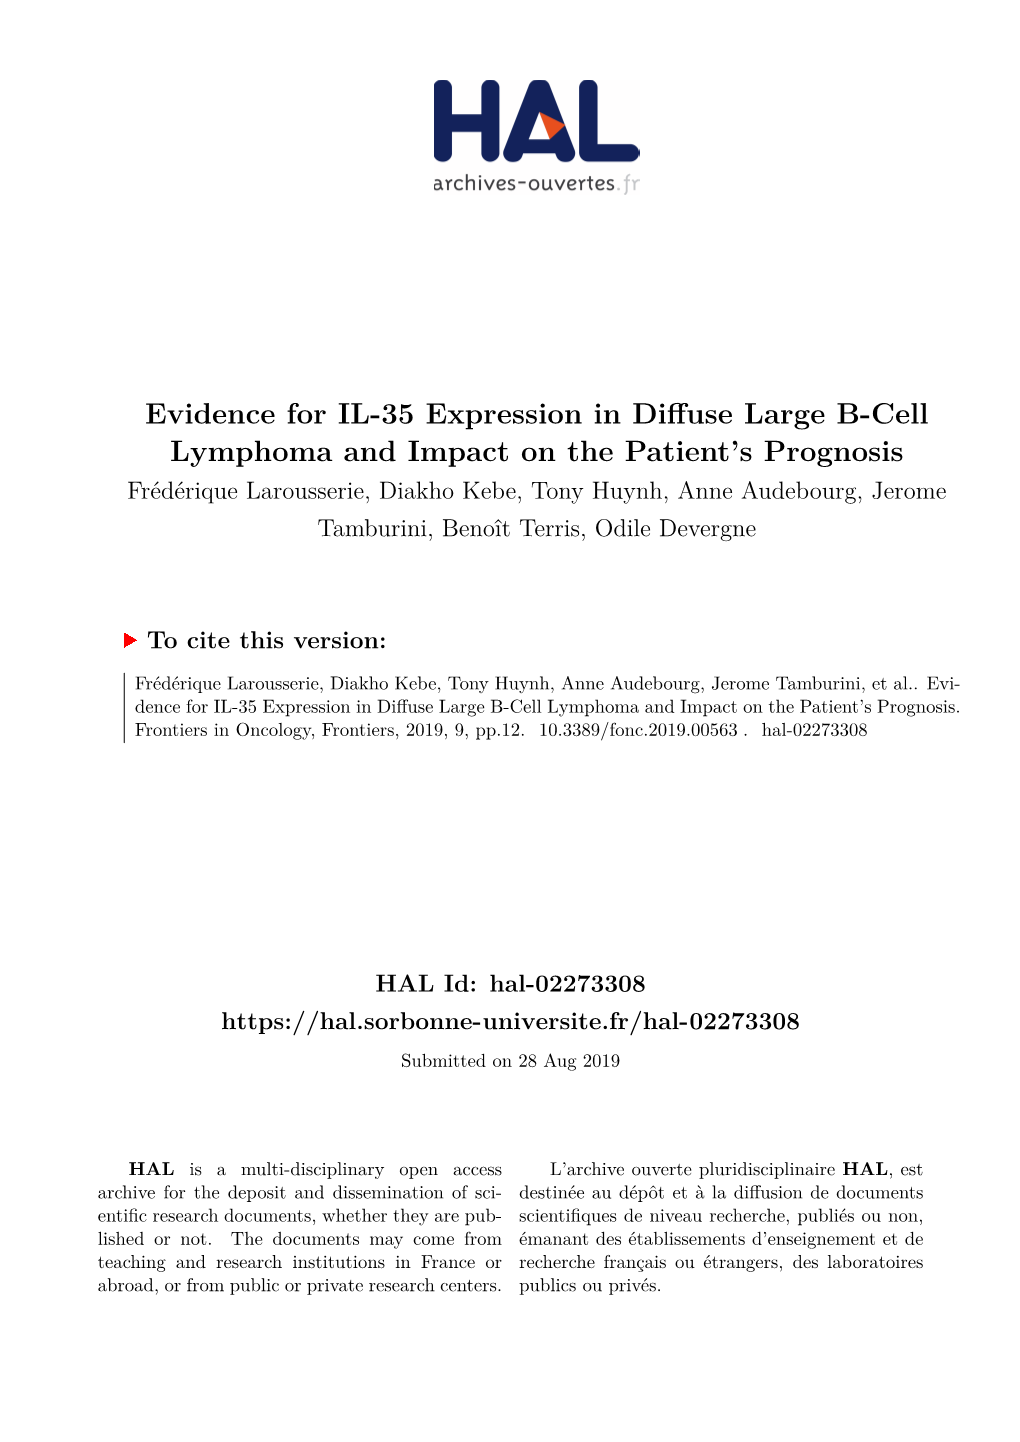 Evidence for IL-35 Expression in Diffuse Large B-Cell Lymphoma